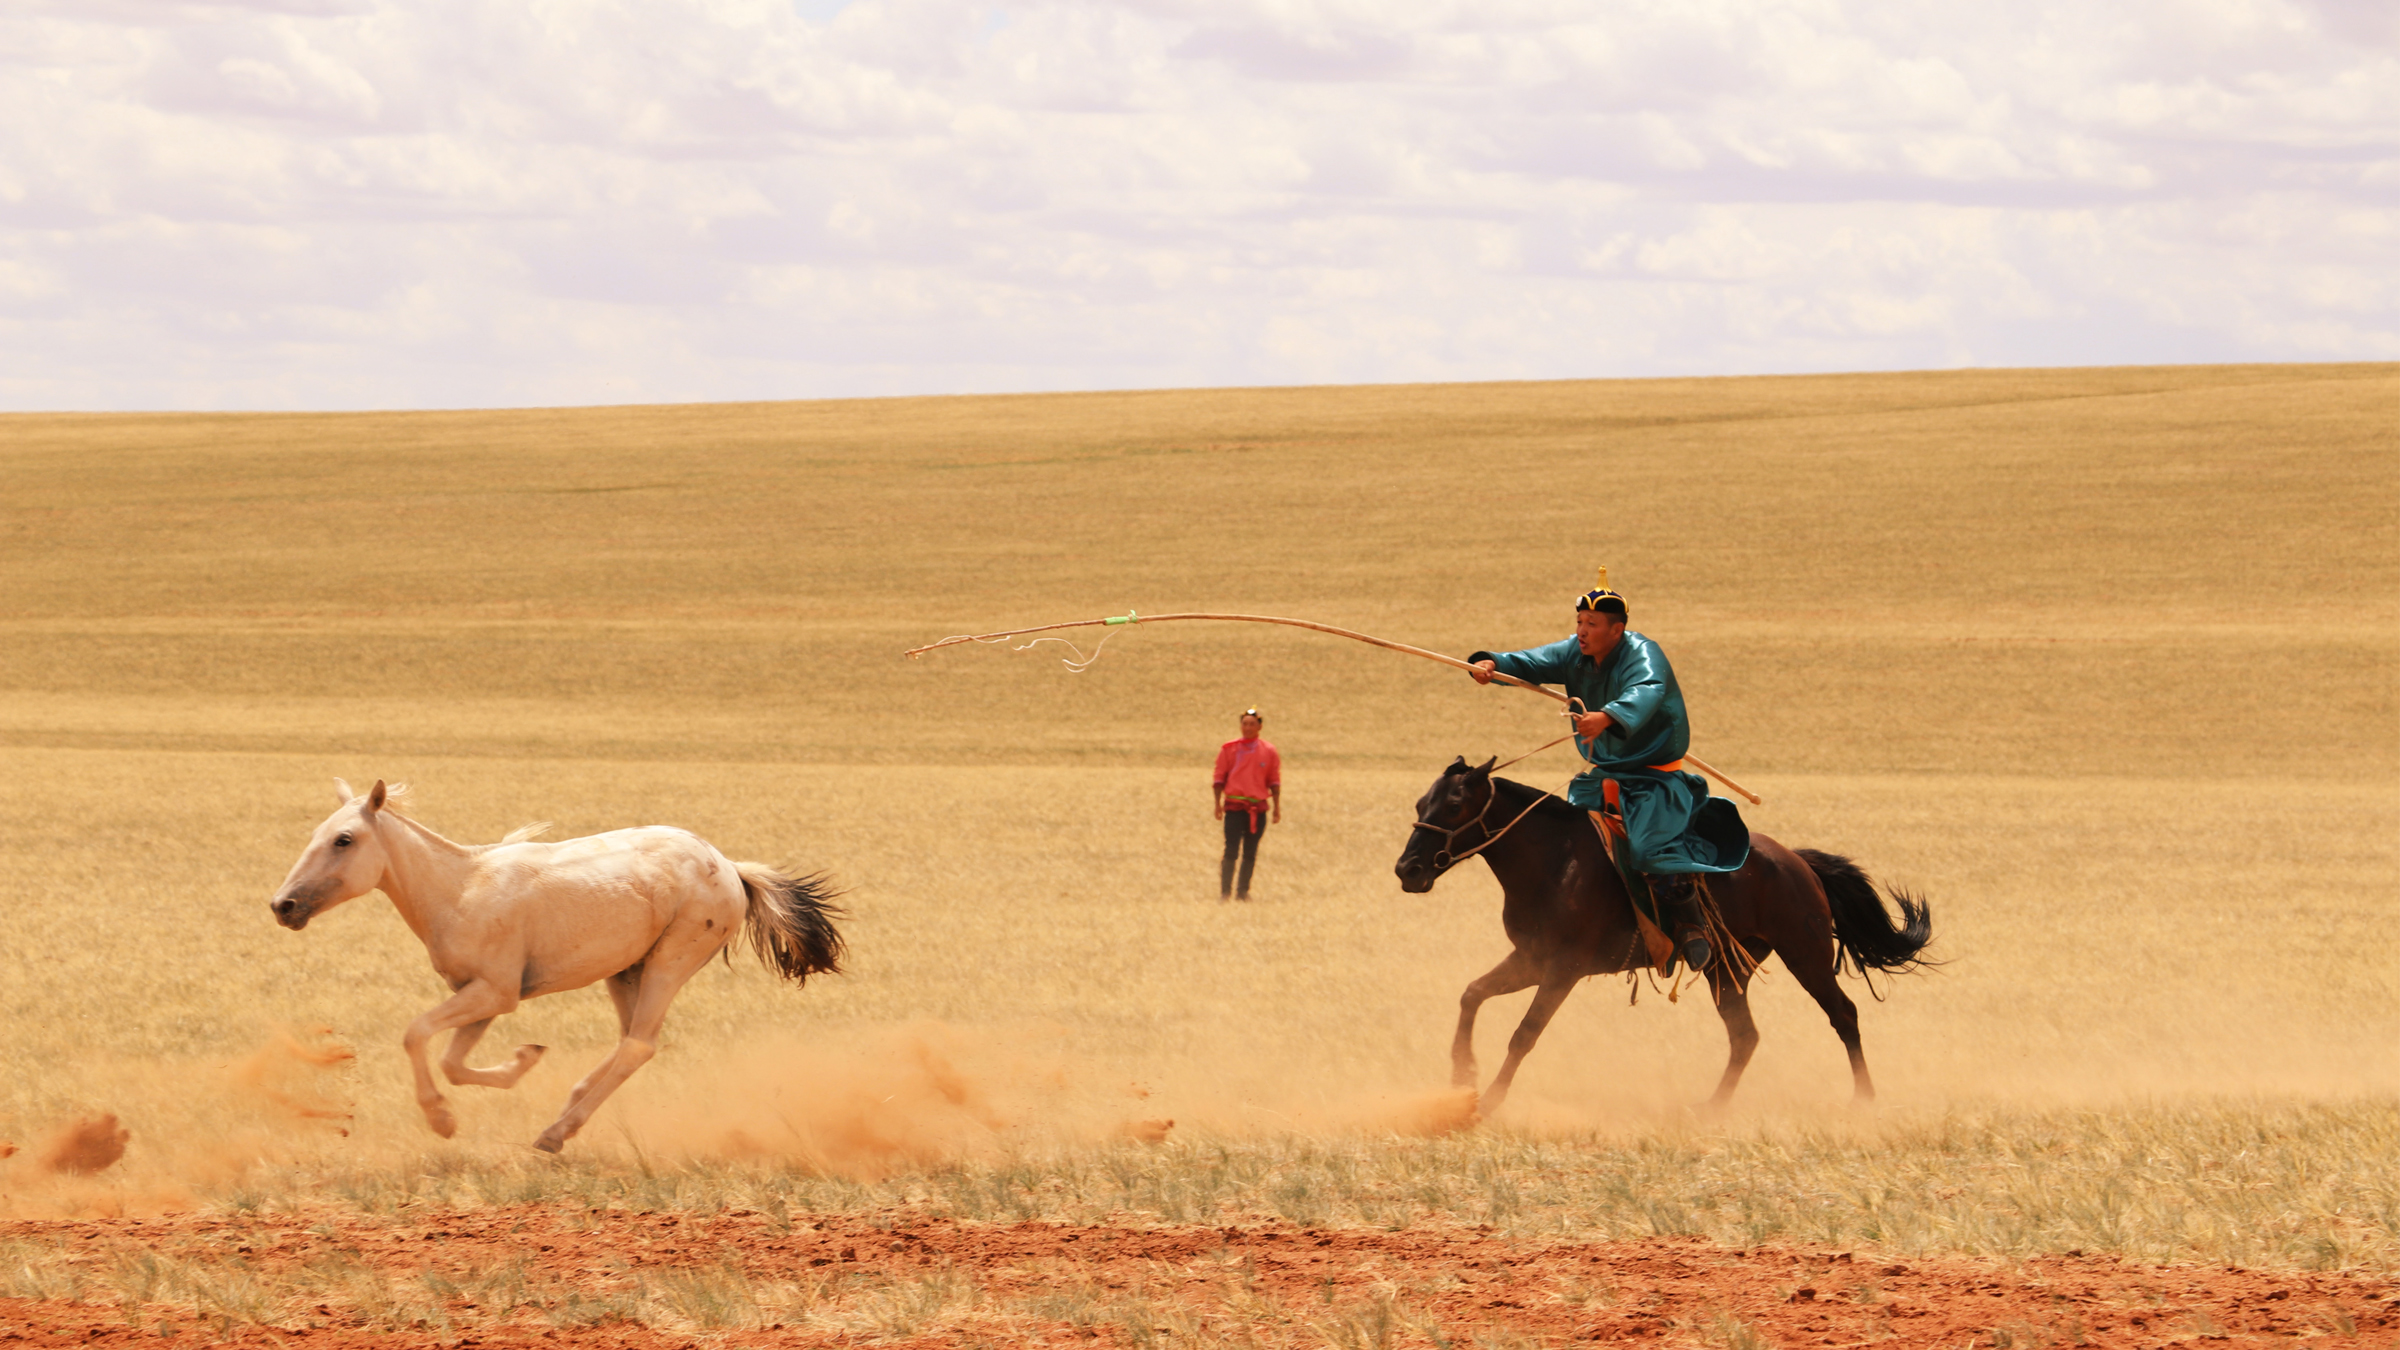 Humans didn't domesticate horses until 4,200 years ago — a millennium later than thought